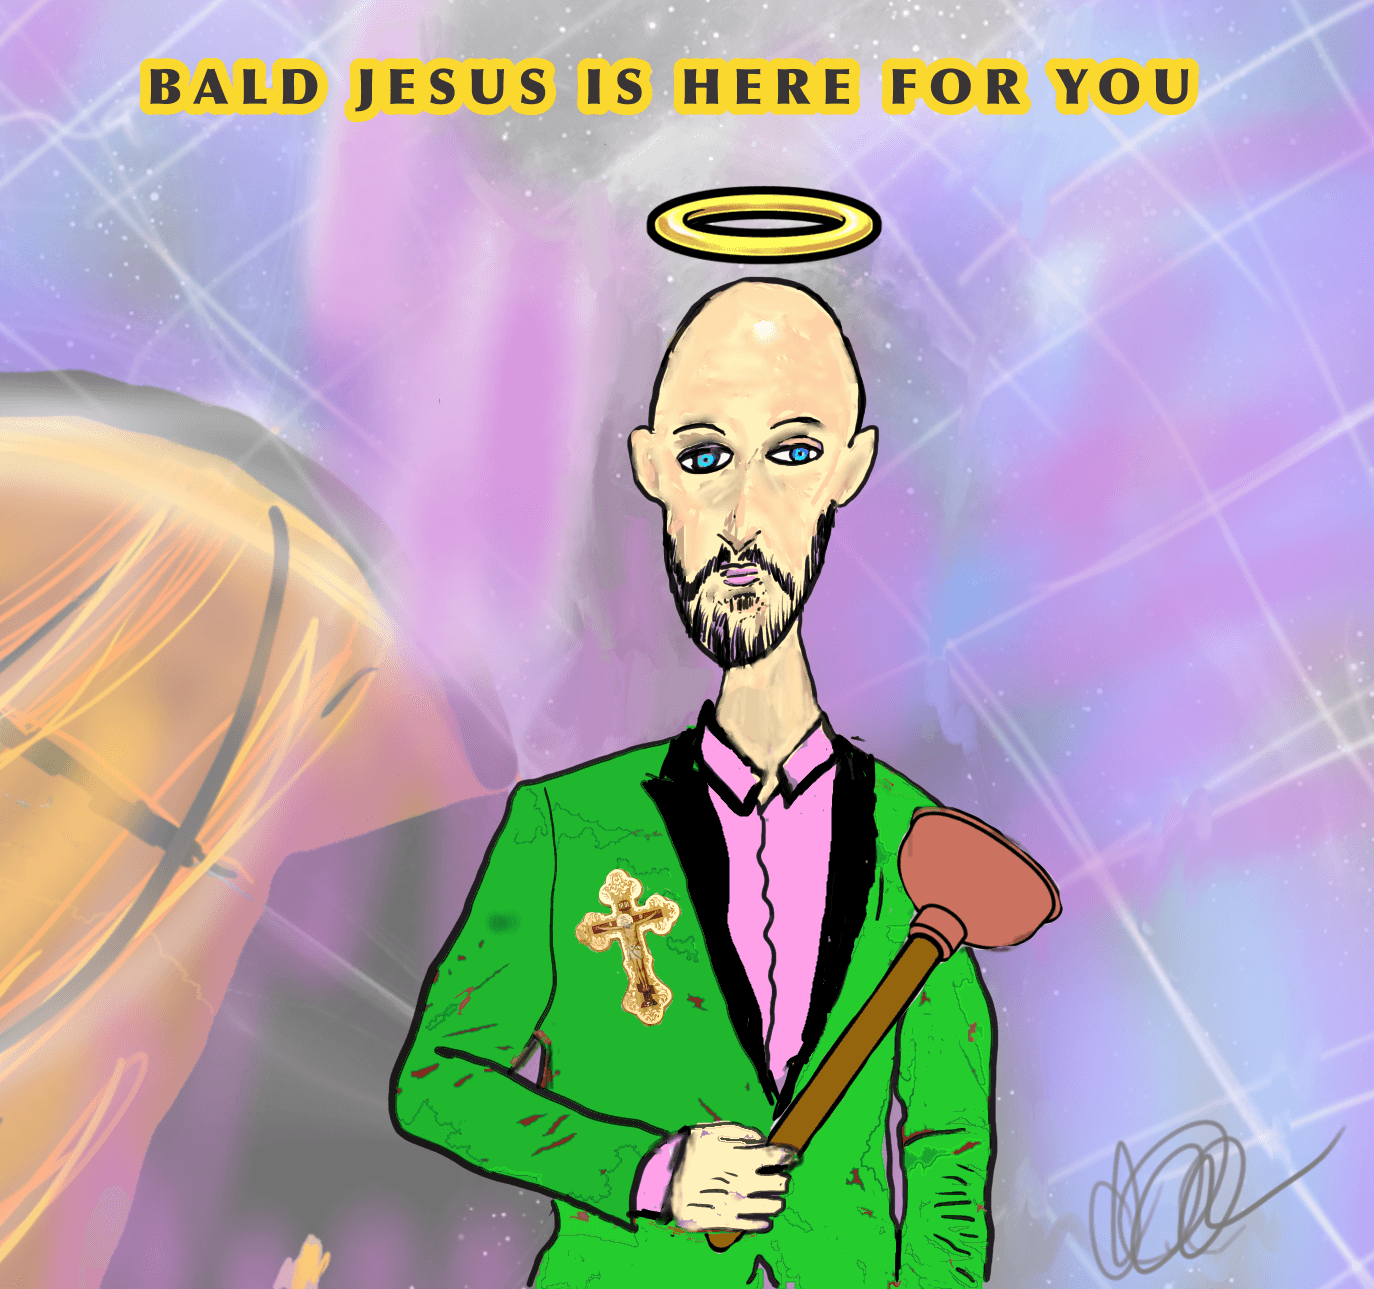 Bald Jesus is Here For You by Vagobond v. 1/1